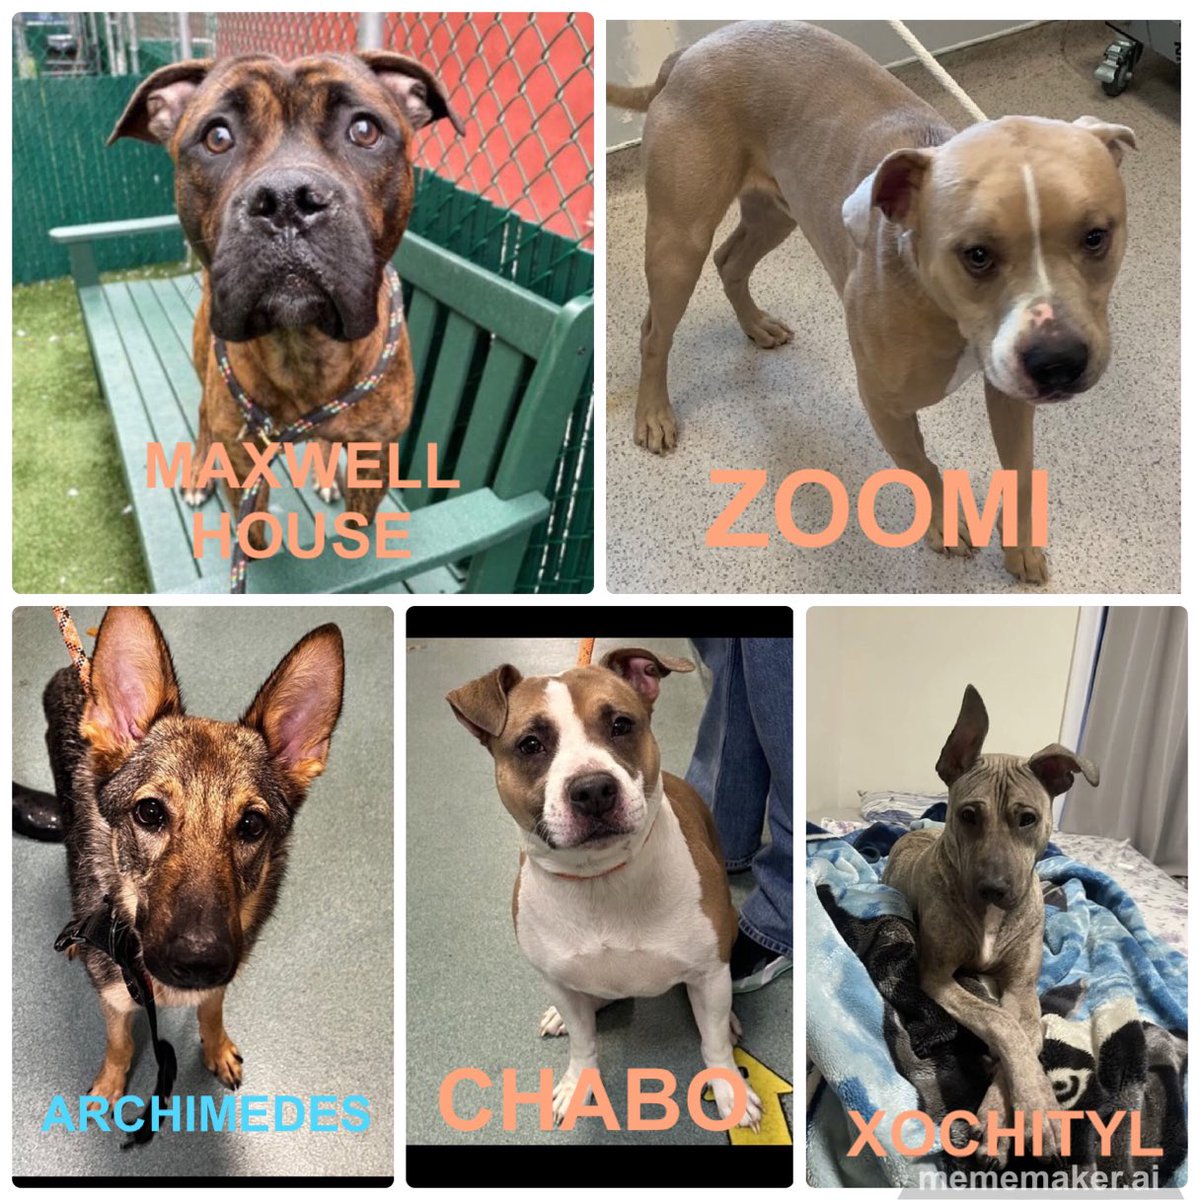 🆘🆘ACTIVE KILL☠️ COMMANDS #NYCACC All pups 🐶 need a #FOSTER as #RESQ only 🙏🙏 ❤️‍🩹MAXWELL HOUSE 2yrs ❤️‍🩹ZOOMI. 3yrs ❤️‍🩹ARCHIMEDES 1yr ❤️‍🩹CHABO. 4yrs ❤️‍🩹XOCHITYL. 1yr PLEASE #RT #PLEDGE #FOSTER 📧nycdogslivesmatter@gmail.com DM @notthesameone2